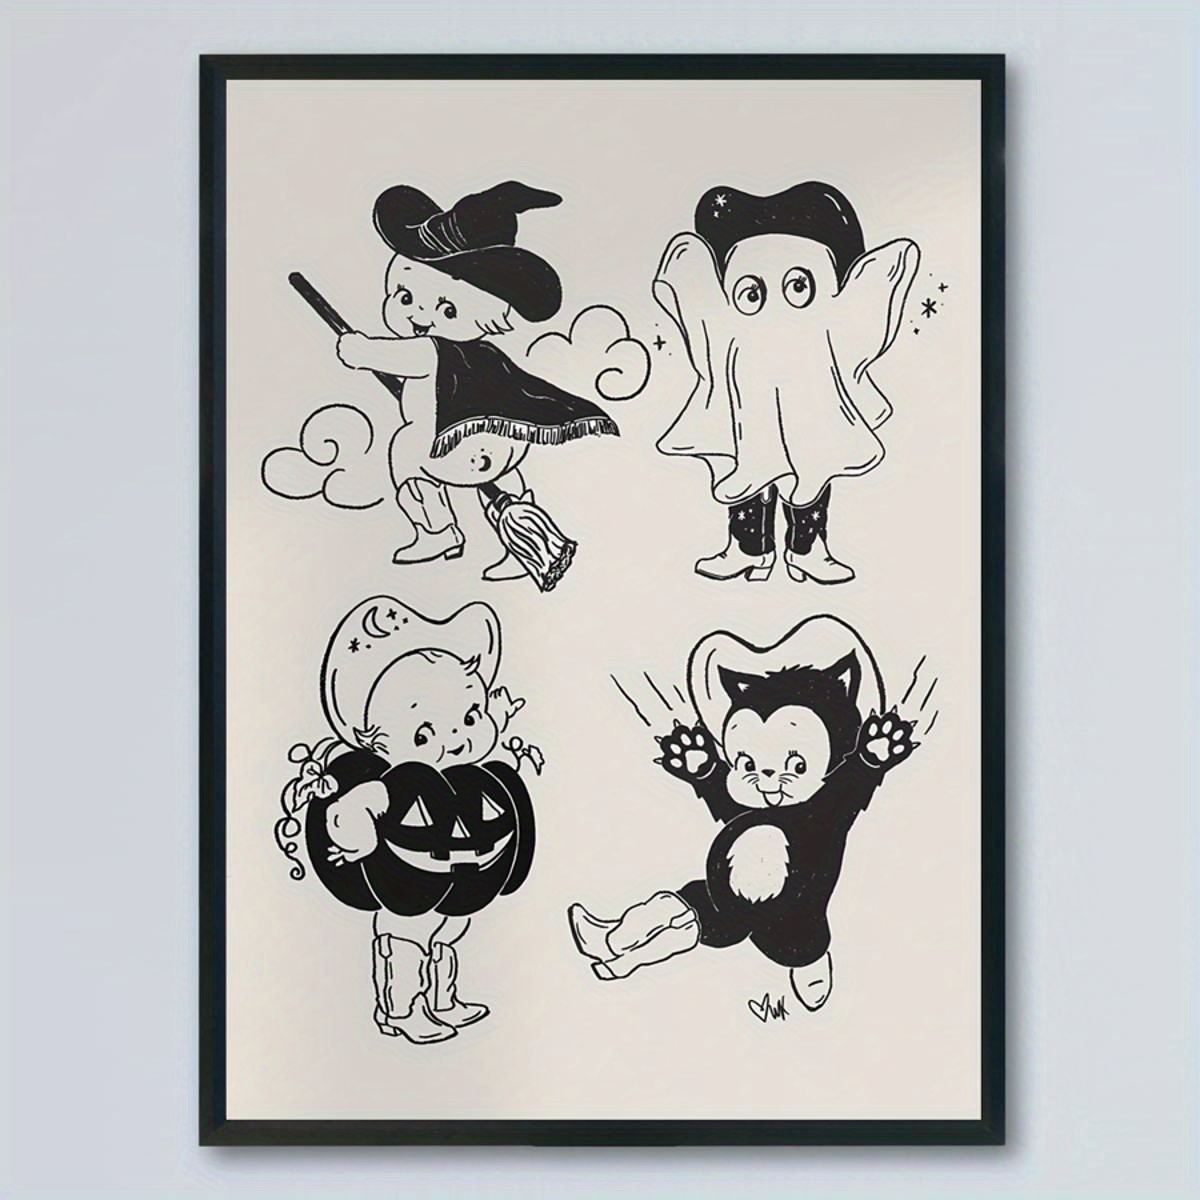 

Halloween Canvas Poster, Cartoon Cowgirl Flash Sheet, 8x10 Art Print, Vintage Wall Art For Living Room, Bedroom, Home Office Decor, Frameless Ink Wall Hanging Decor, Modern Retro Style